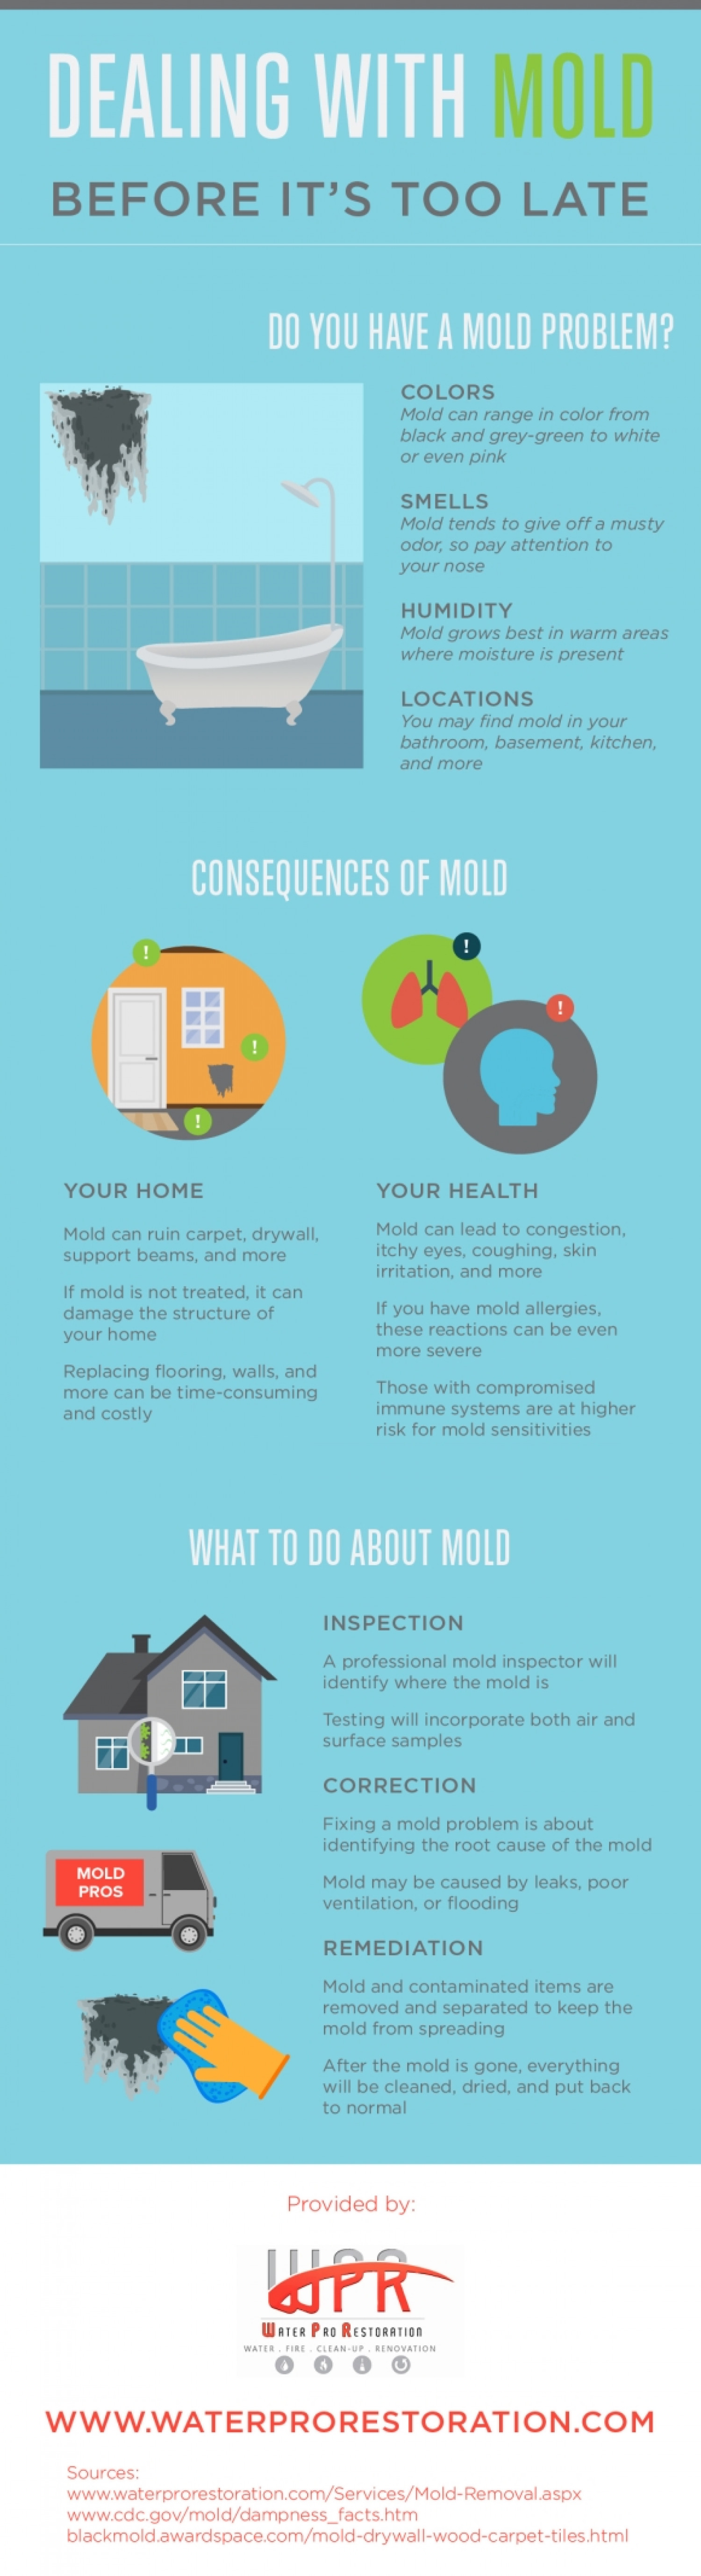 Dealing with Mold Before It’s Too Late  Infographic